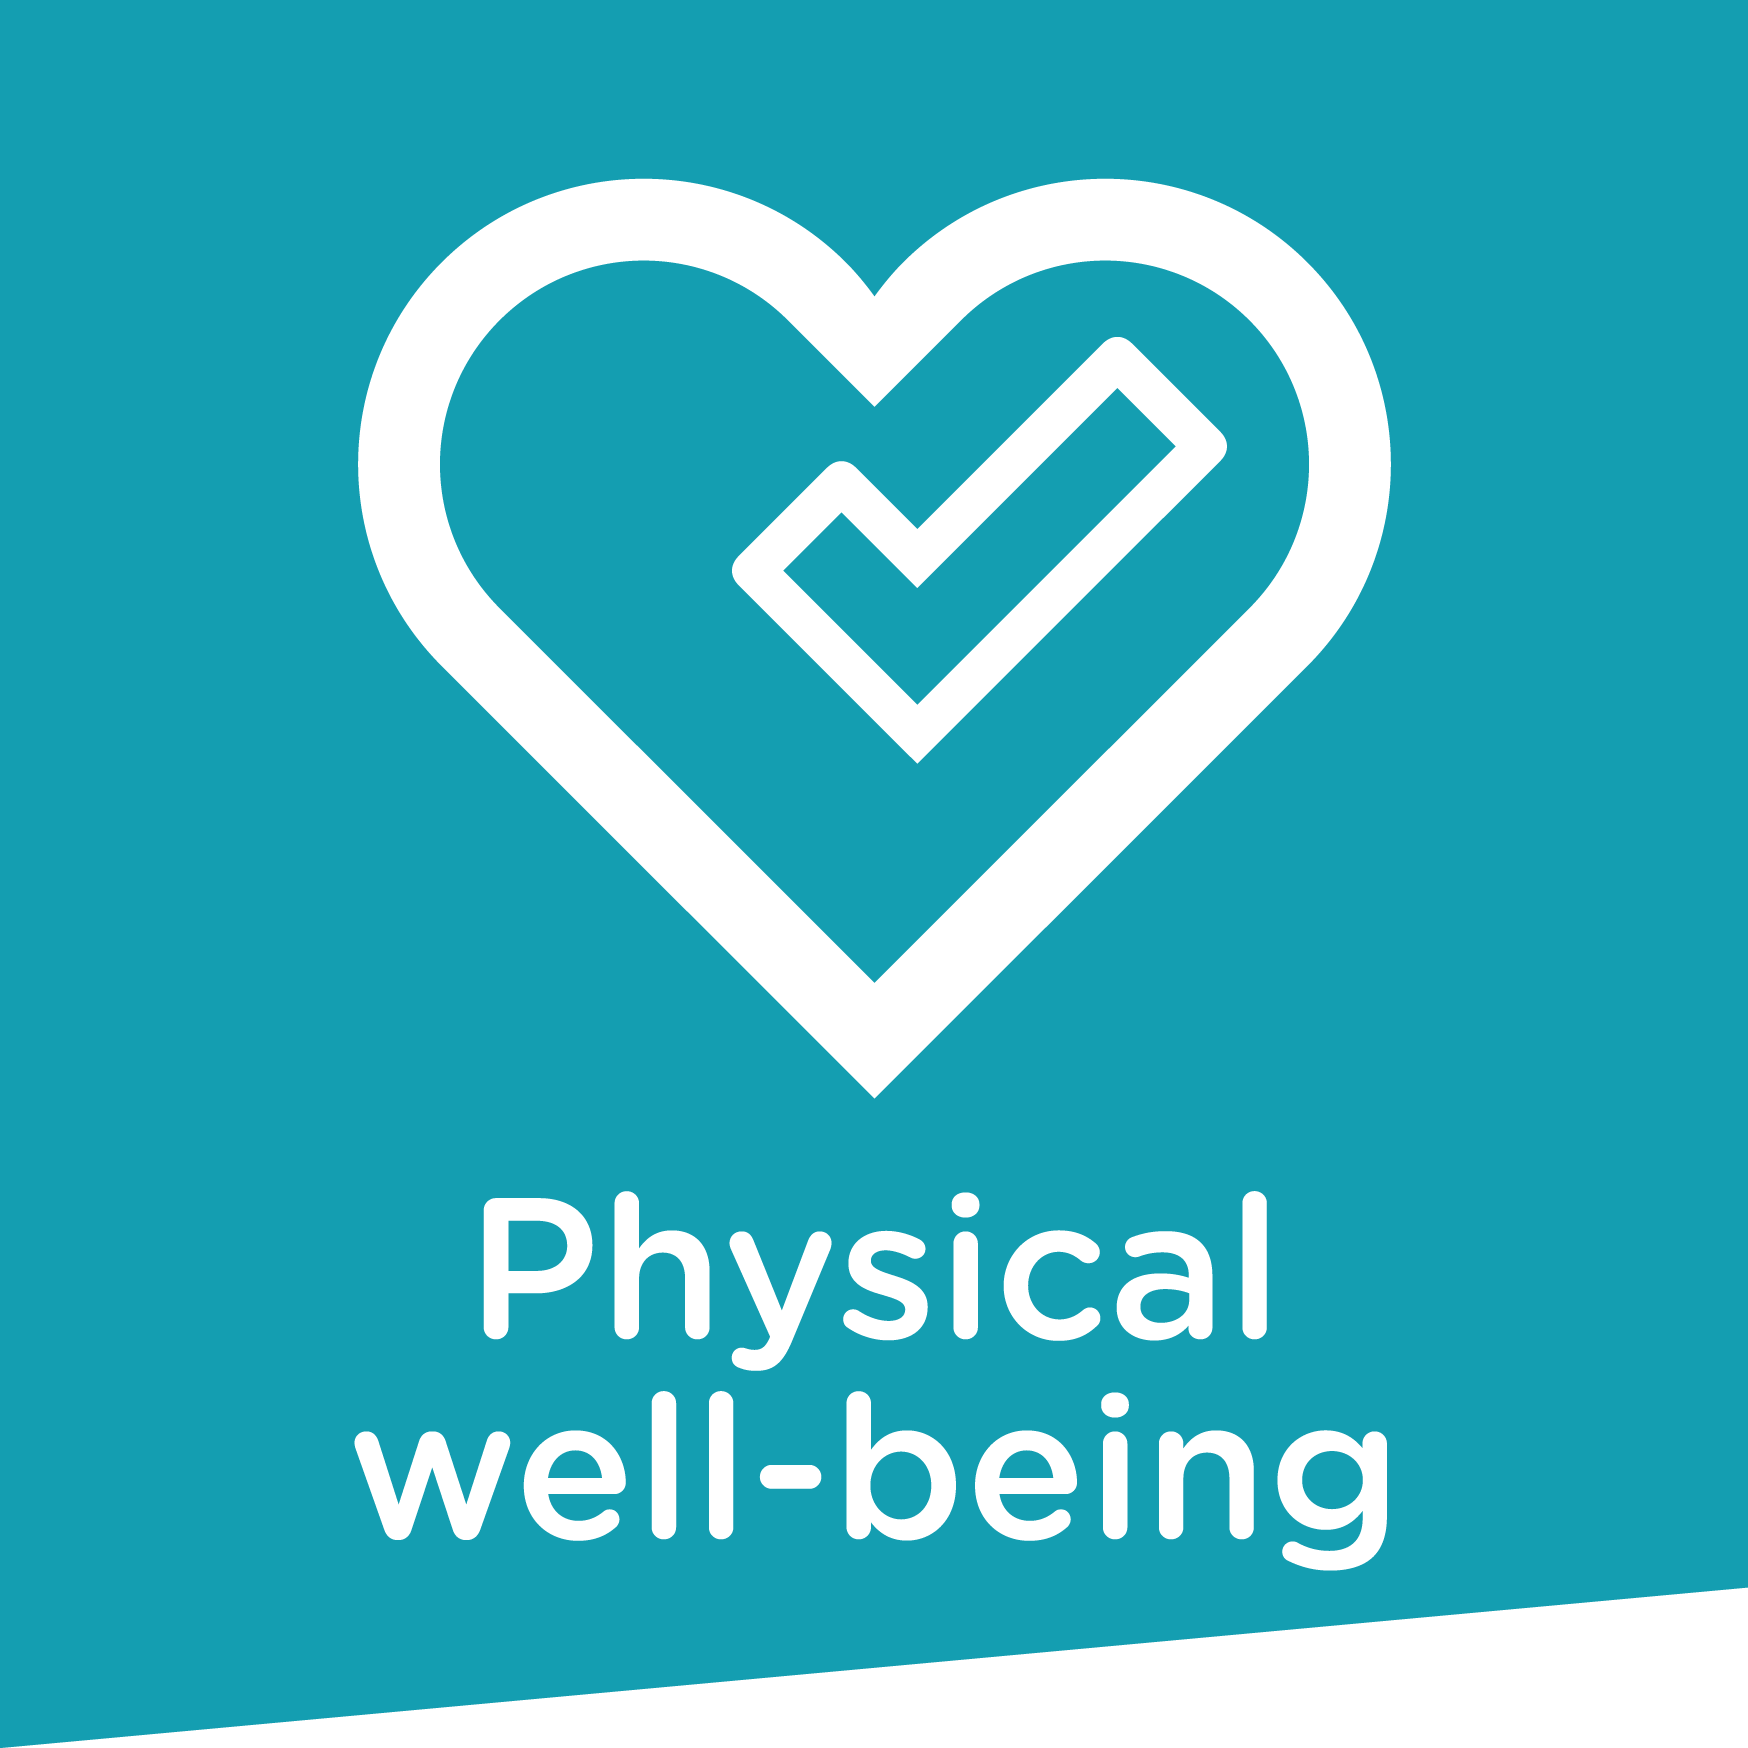 Physical well-being